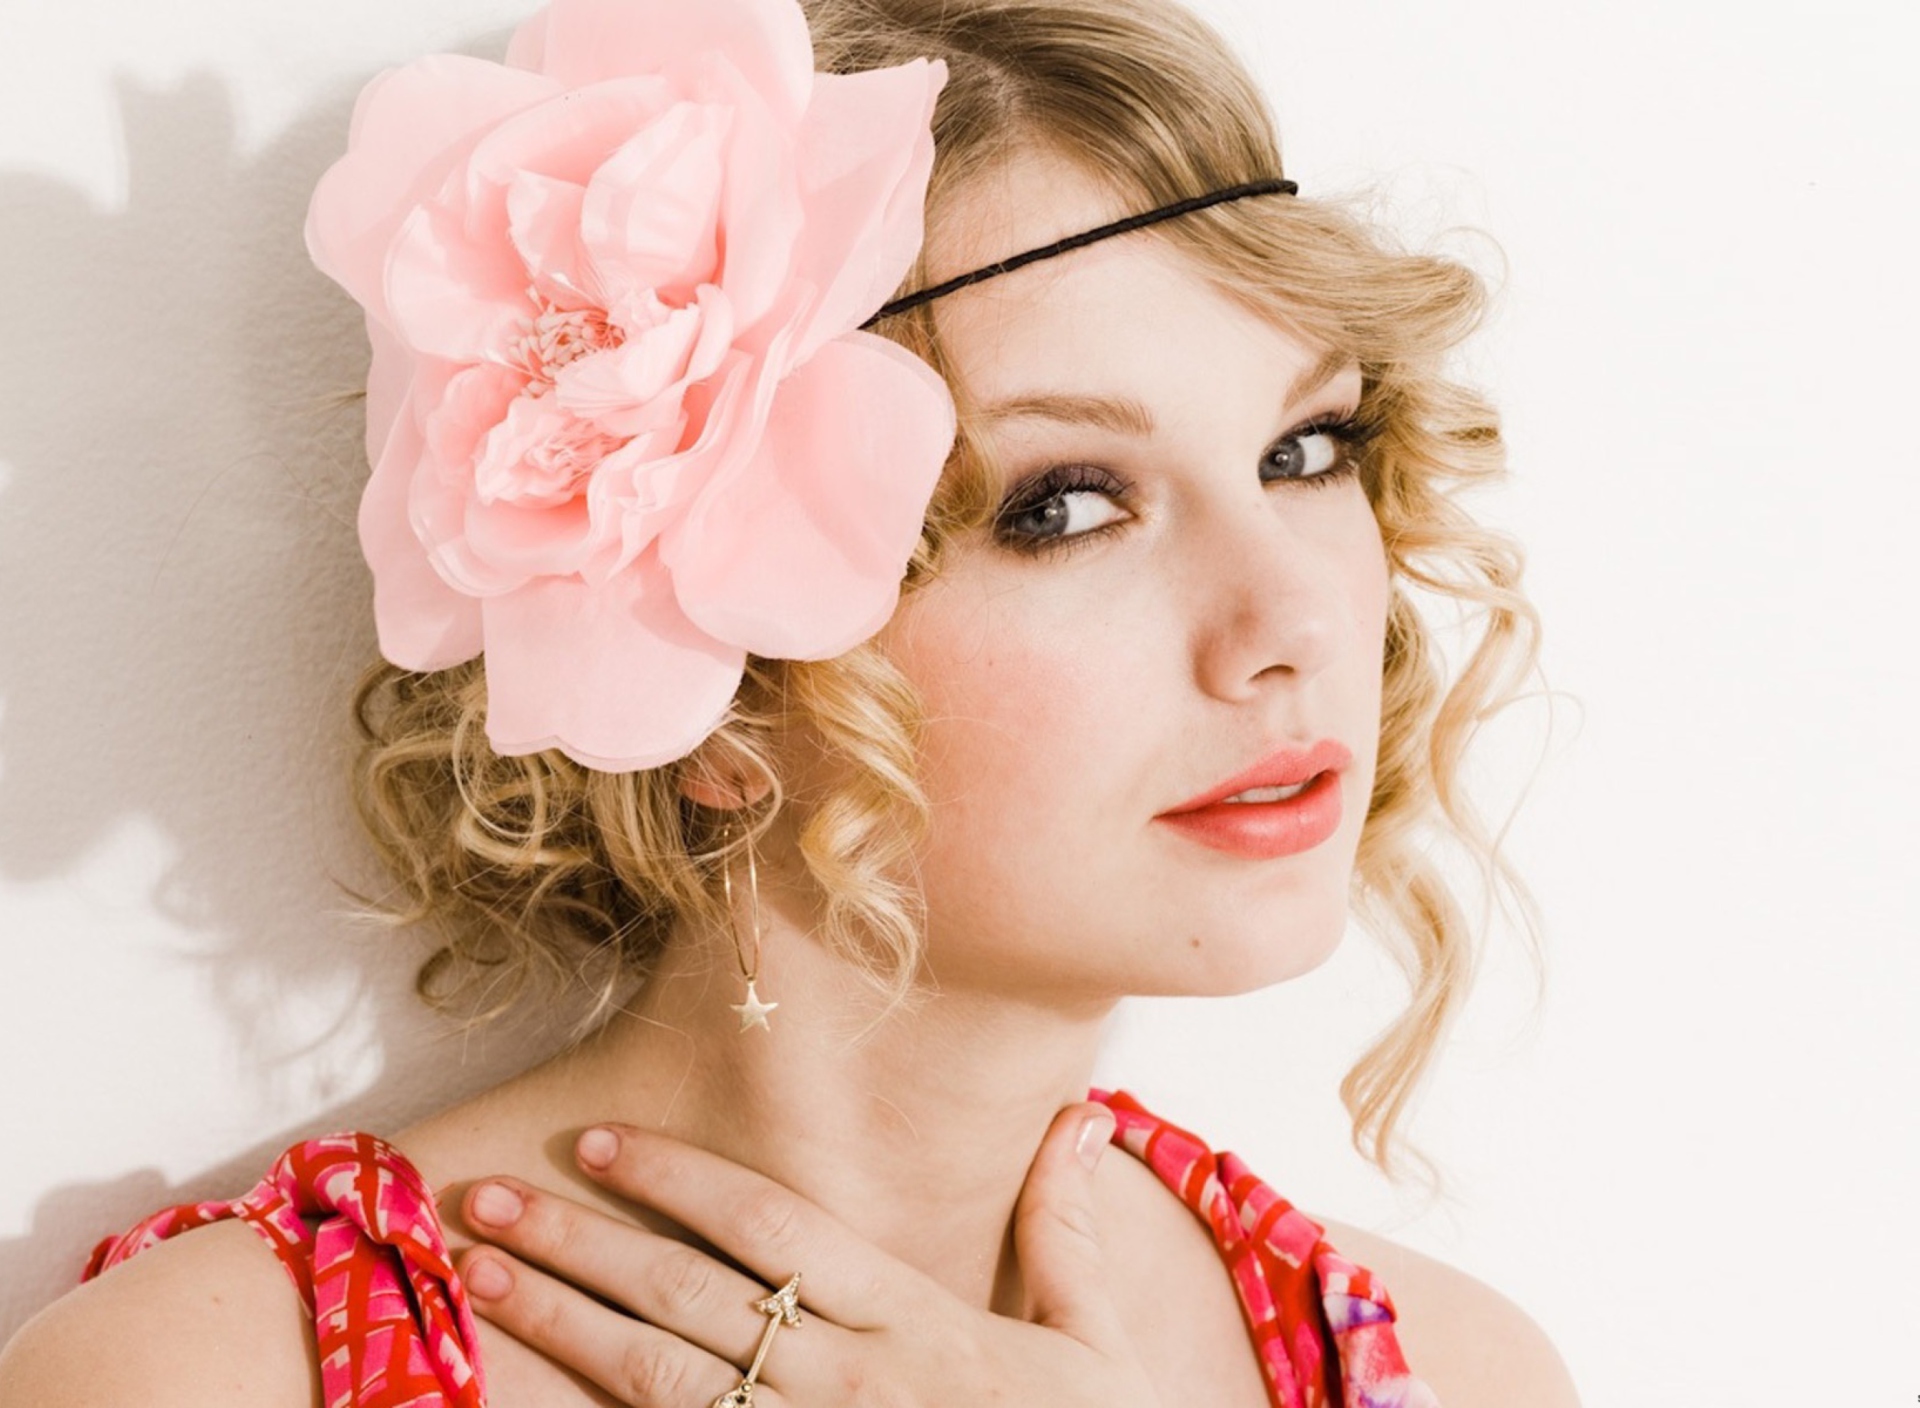 Das Taylor Swift With Pink Rose On Head Wallpaper 1920x1408